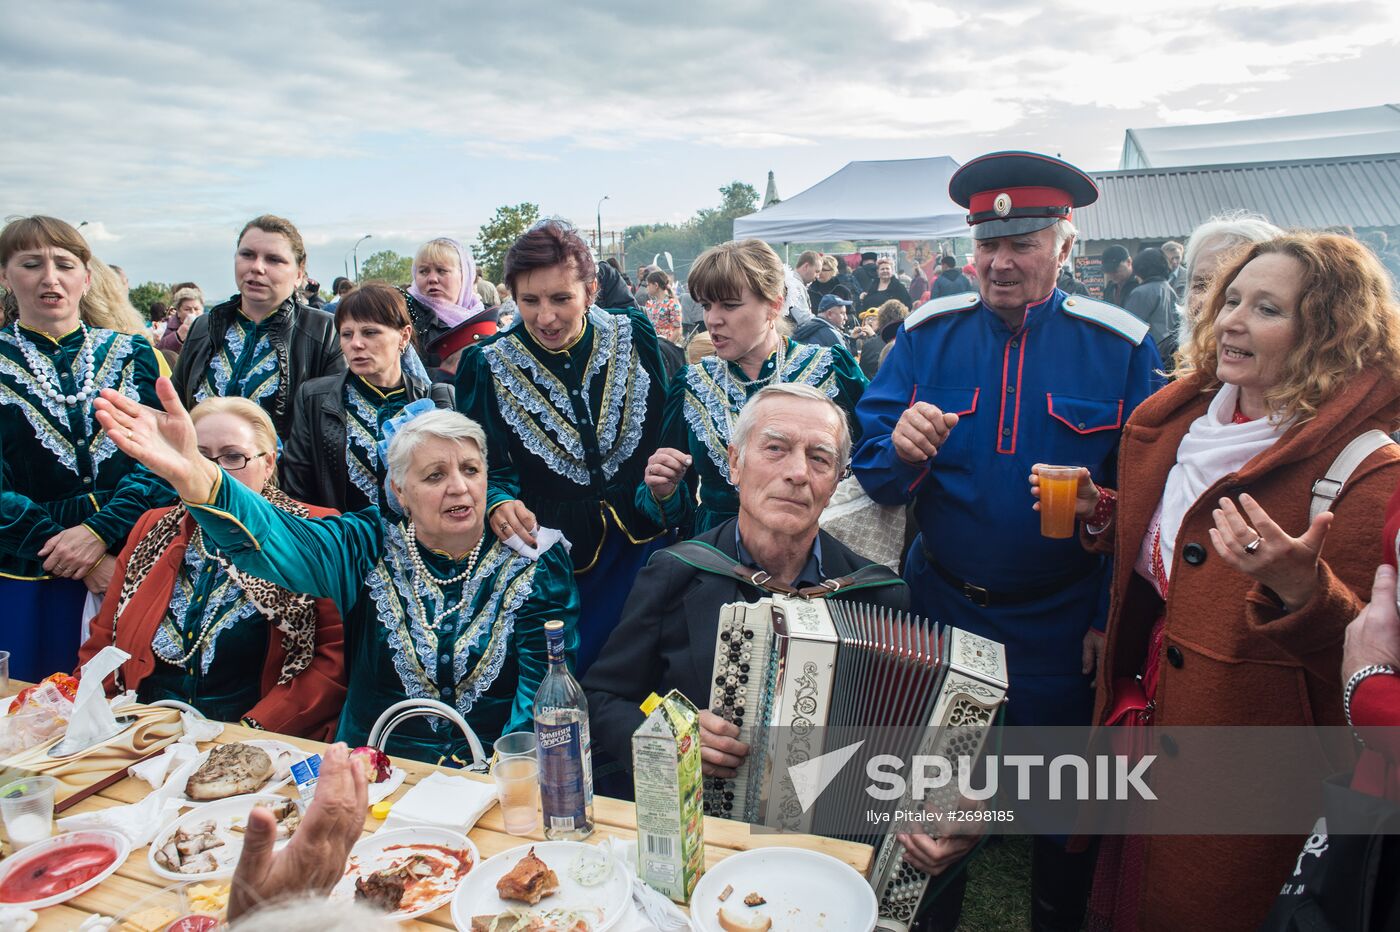 Fifth international festival "Cossack Village of Moscow"